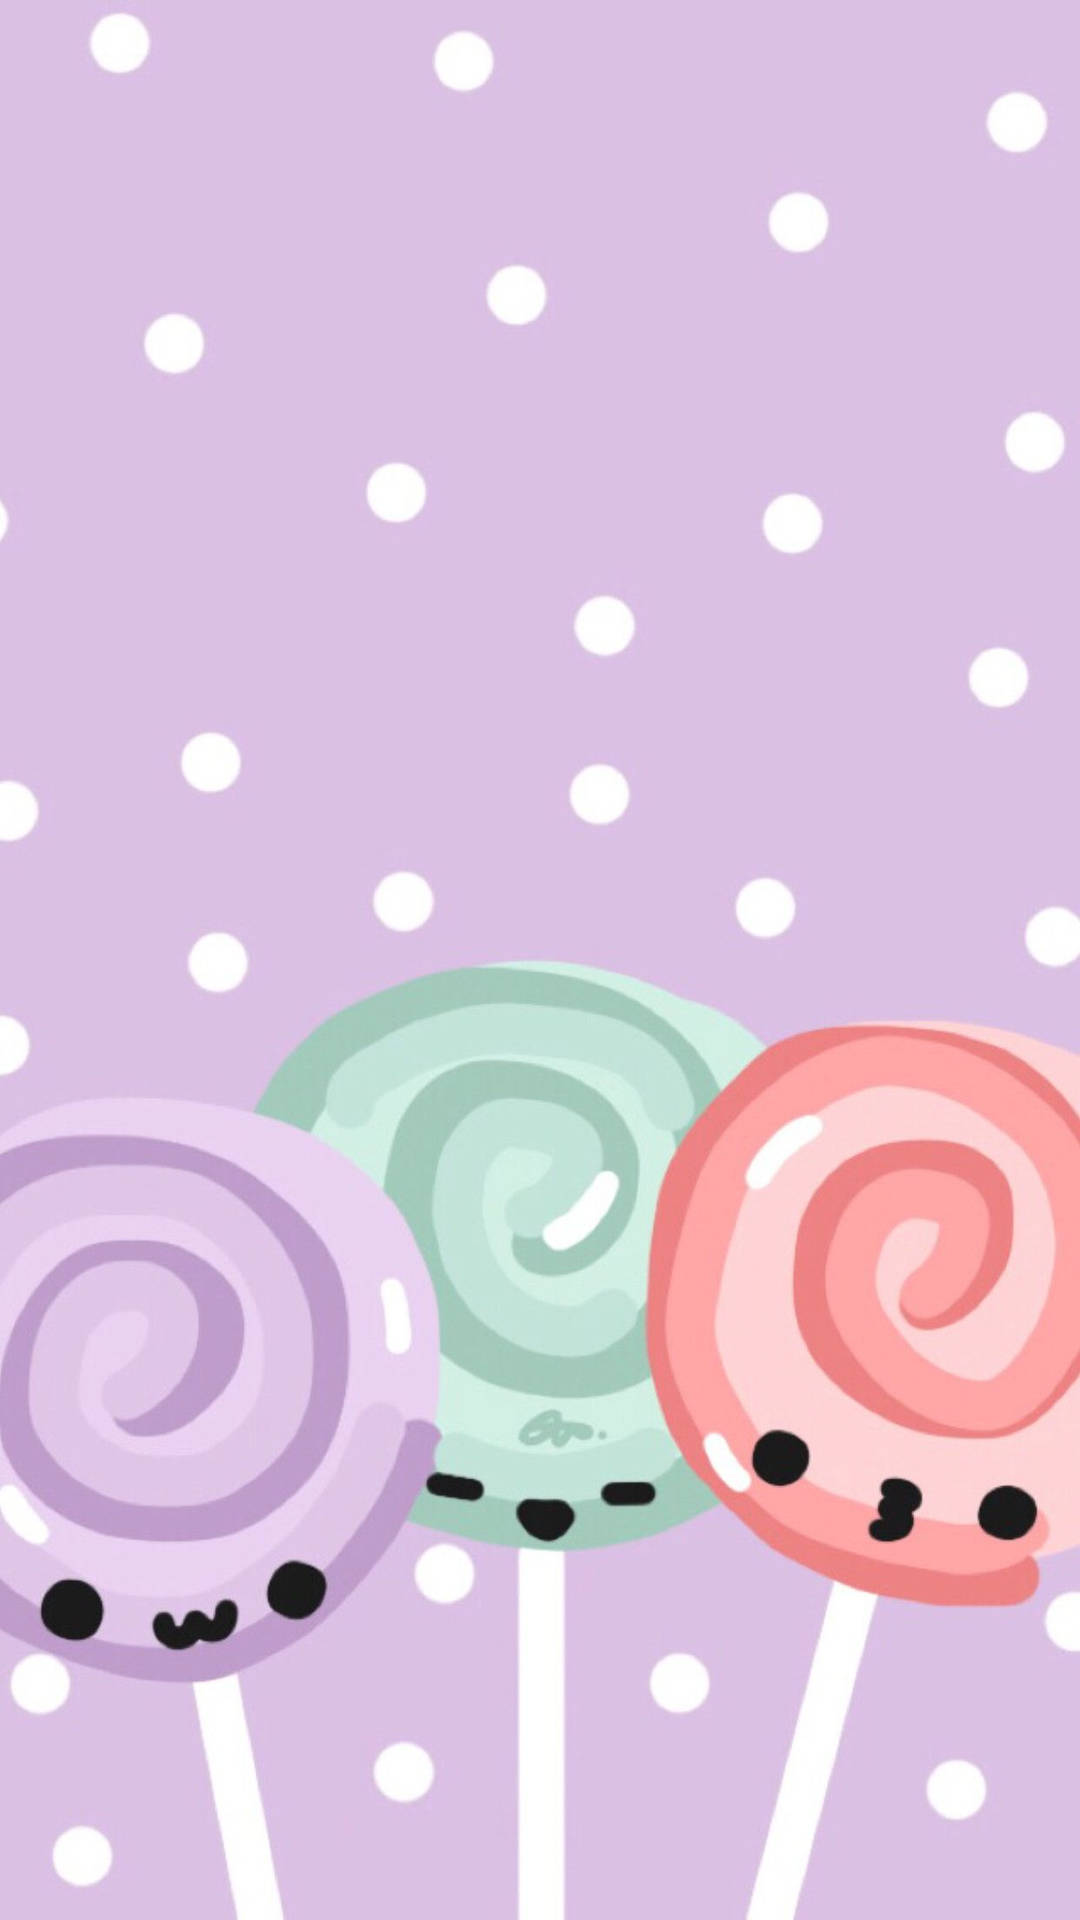 Pastel colored purple, teal, and pink cute lollipop wallpaper.